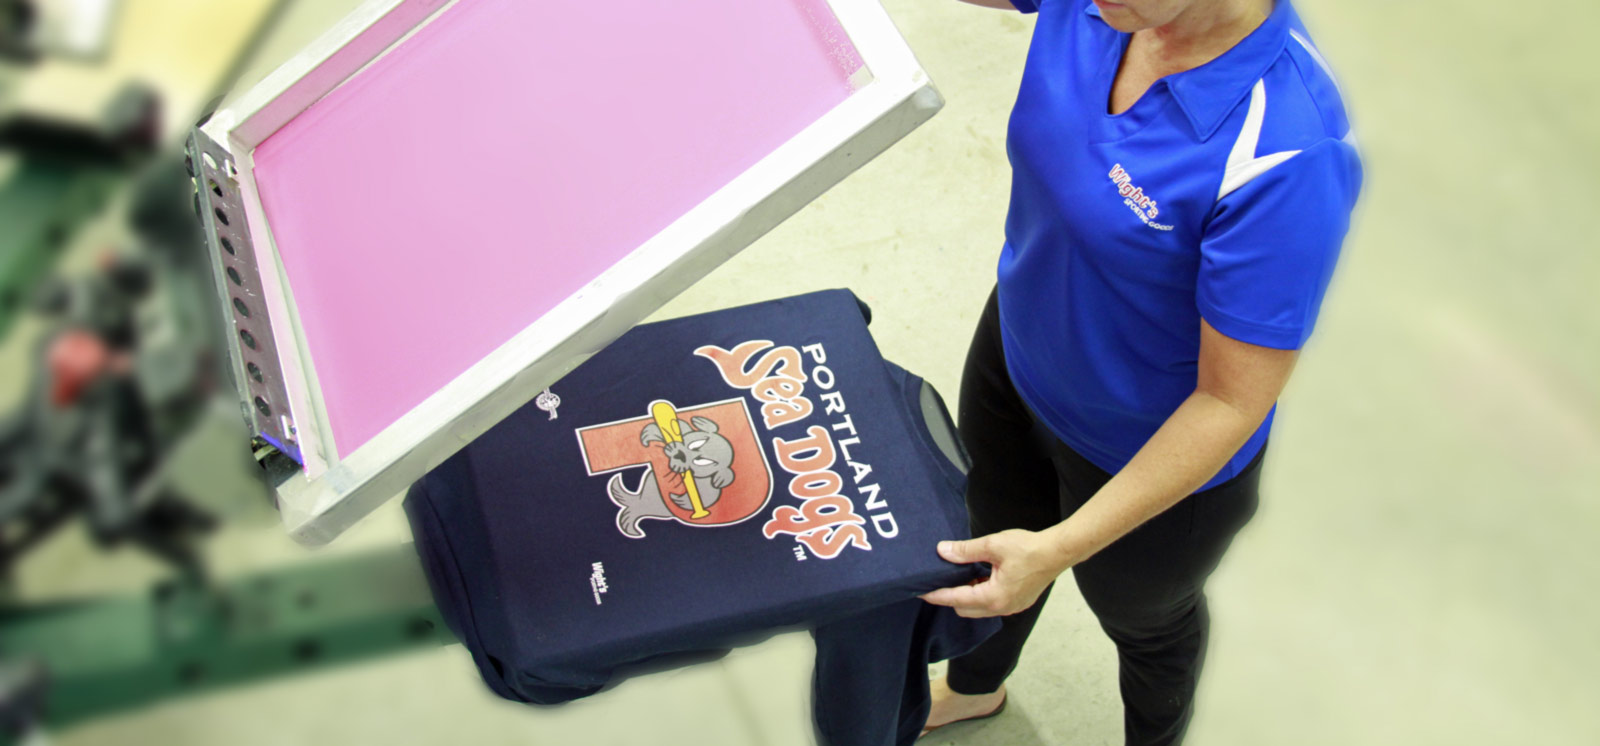 Berg Activewear - Custom Screen Printing and Embroidery Services, Humorous, Politally Incorrect and U-Maine